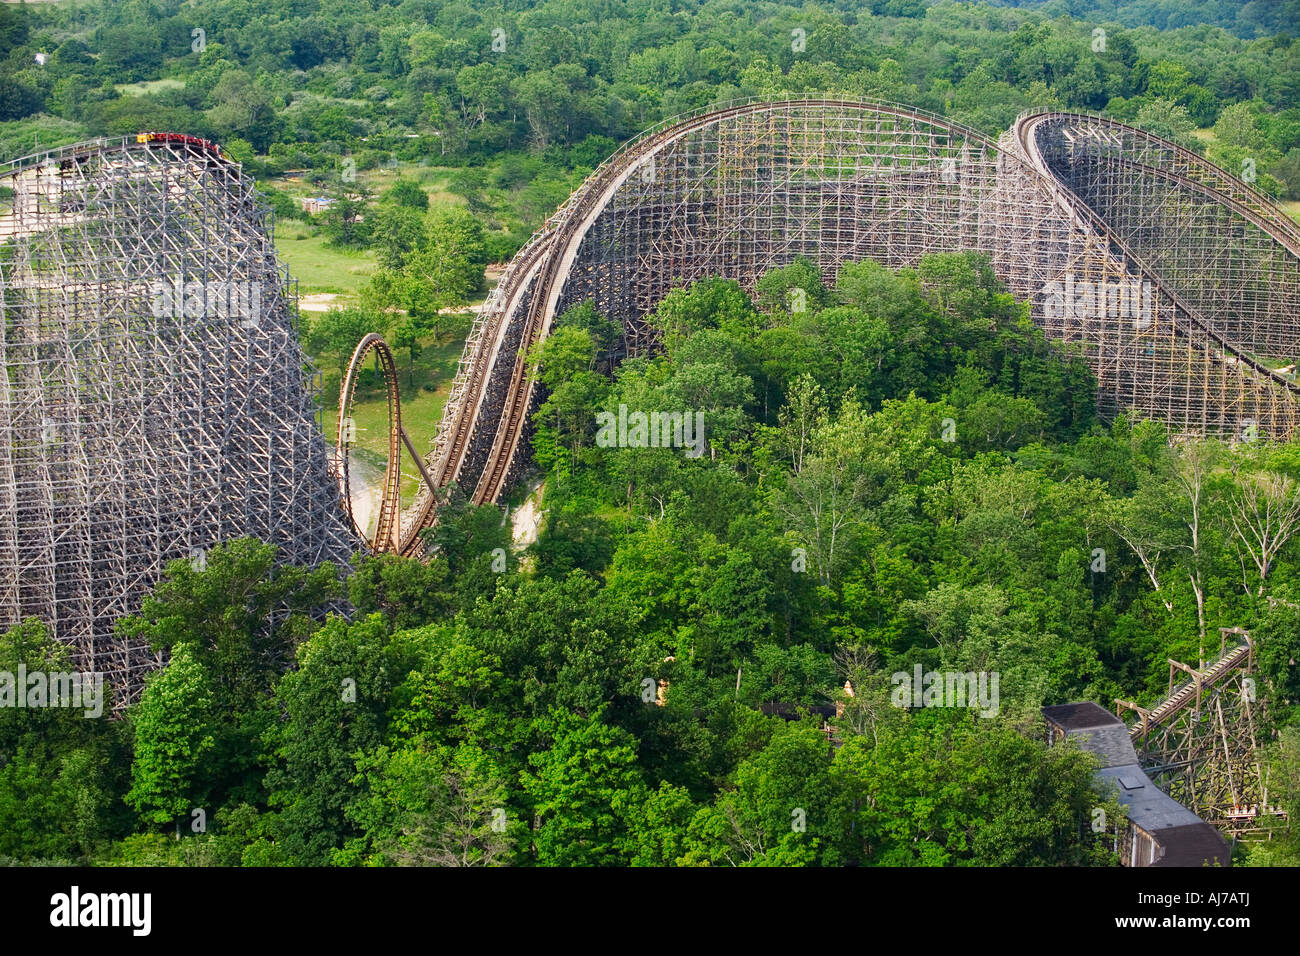 The thrilling wooden roller coaster Son of Beast as seen from King s Island  s Eiffel Tower Cincinnati Ohio Stock Photo - Alamy